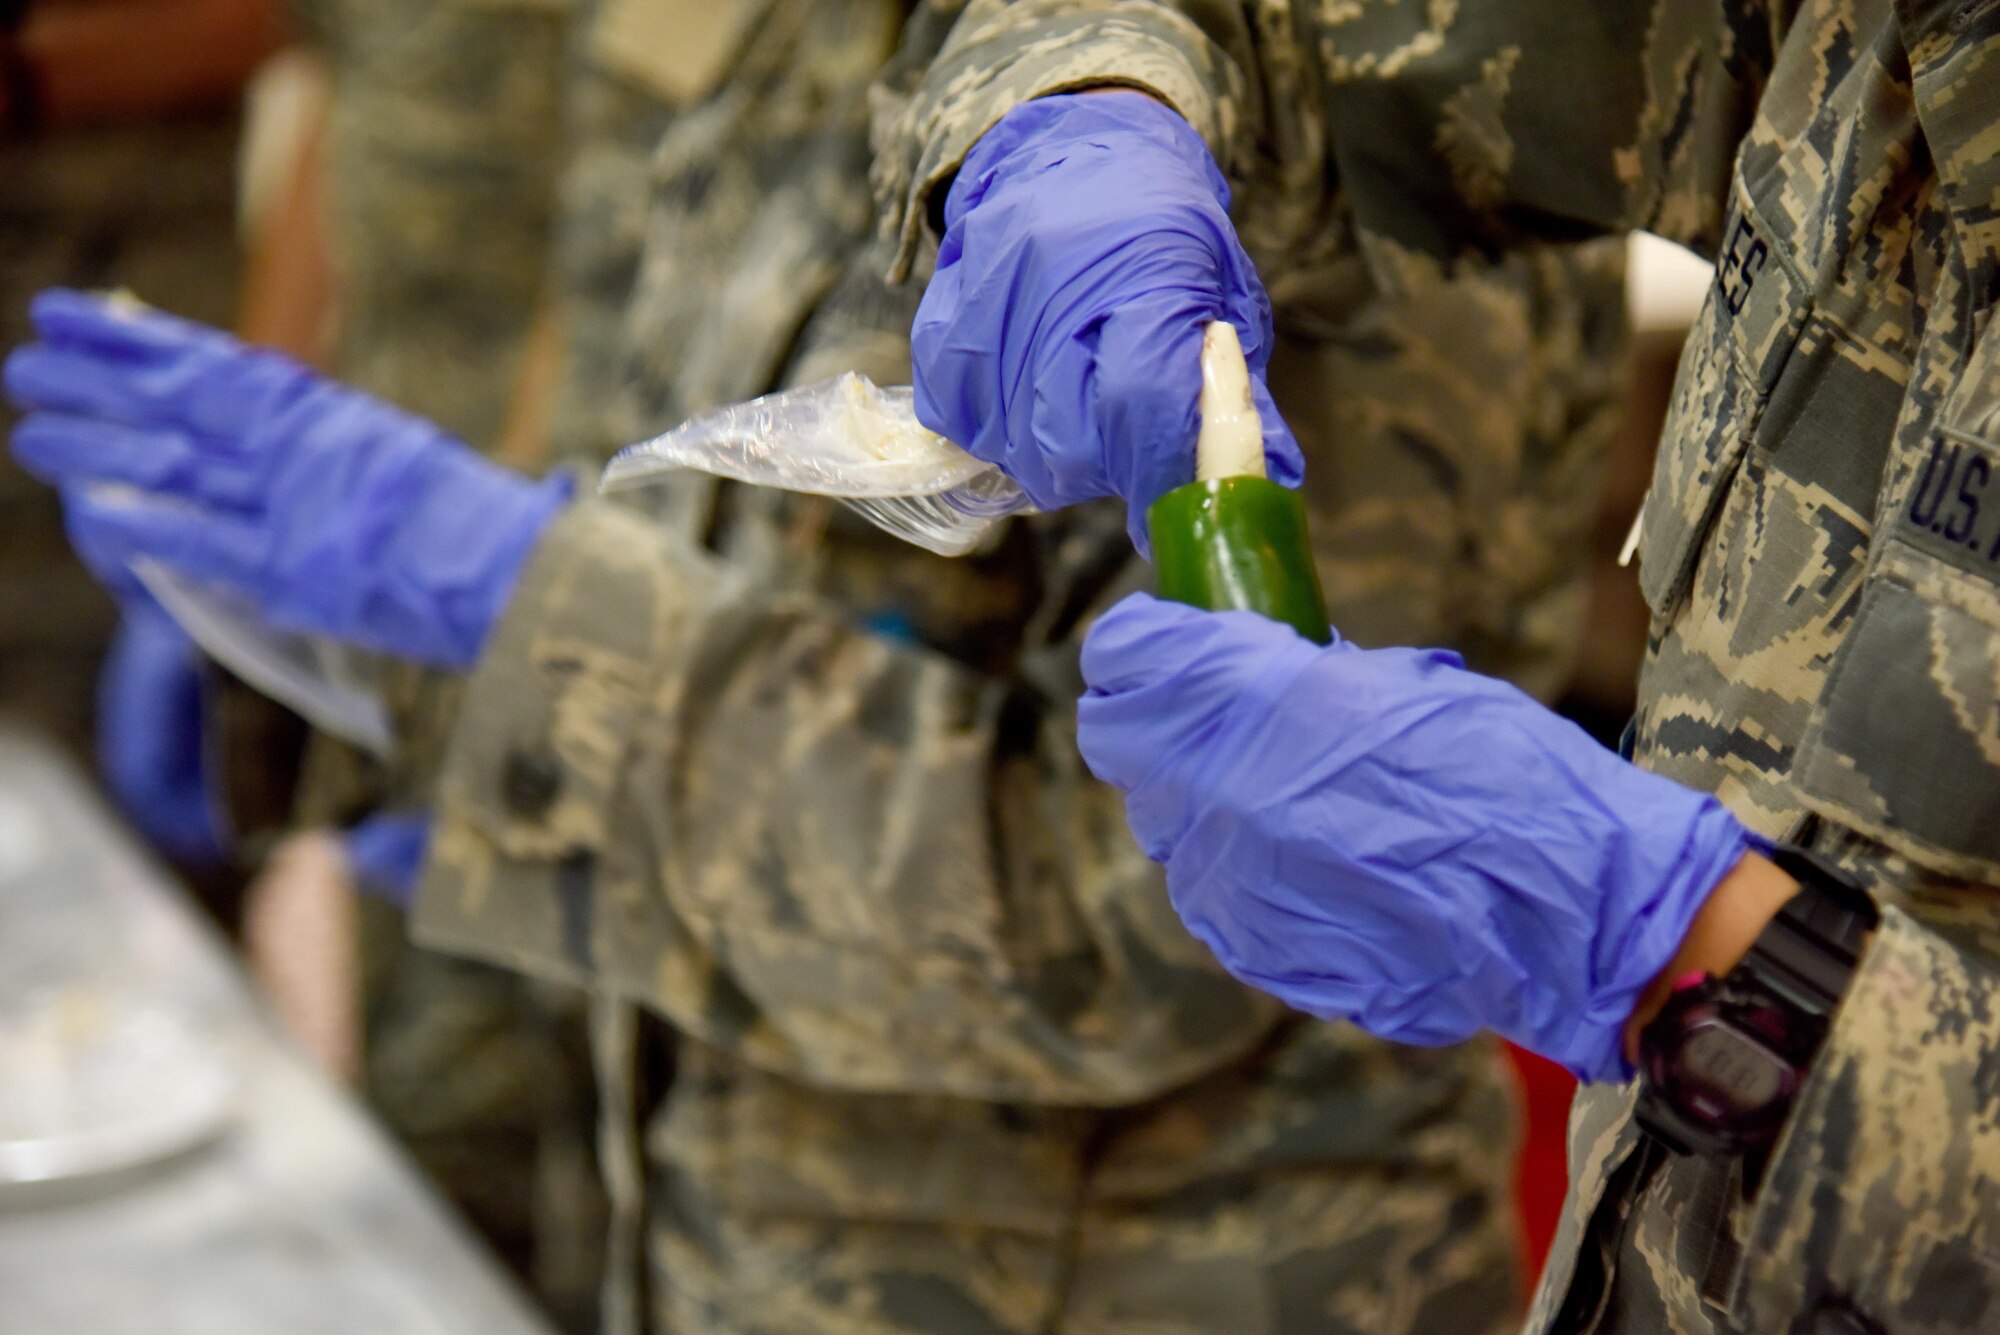 Airmen fill a jalapeno with a cream cheese mixture at the Top Tech competition in the Event Center on Goodfellow Air Force Base, Texas, May 5, 2017. During the competition, instructors had to teach a subject and audience members had to demonstrate their understanding of the topic. (U.S. Air Force photo by Staff Sgt. Joshua Edwards/Released)